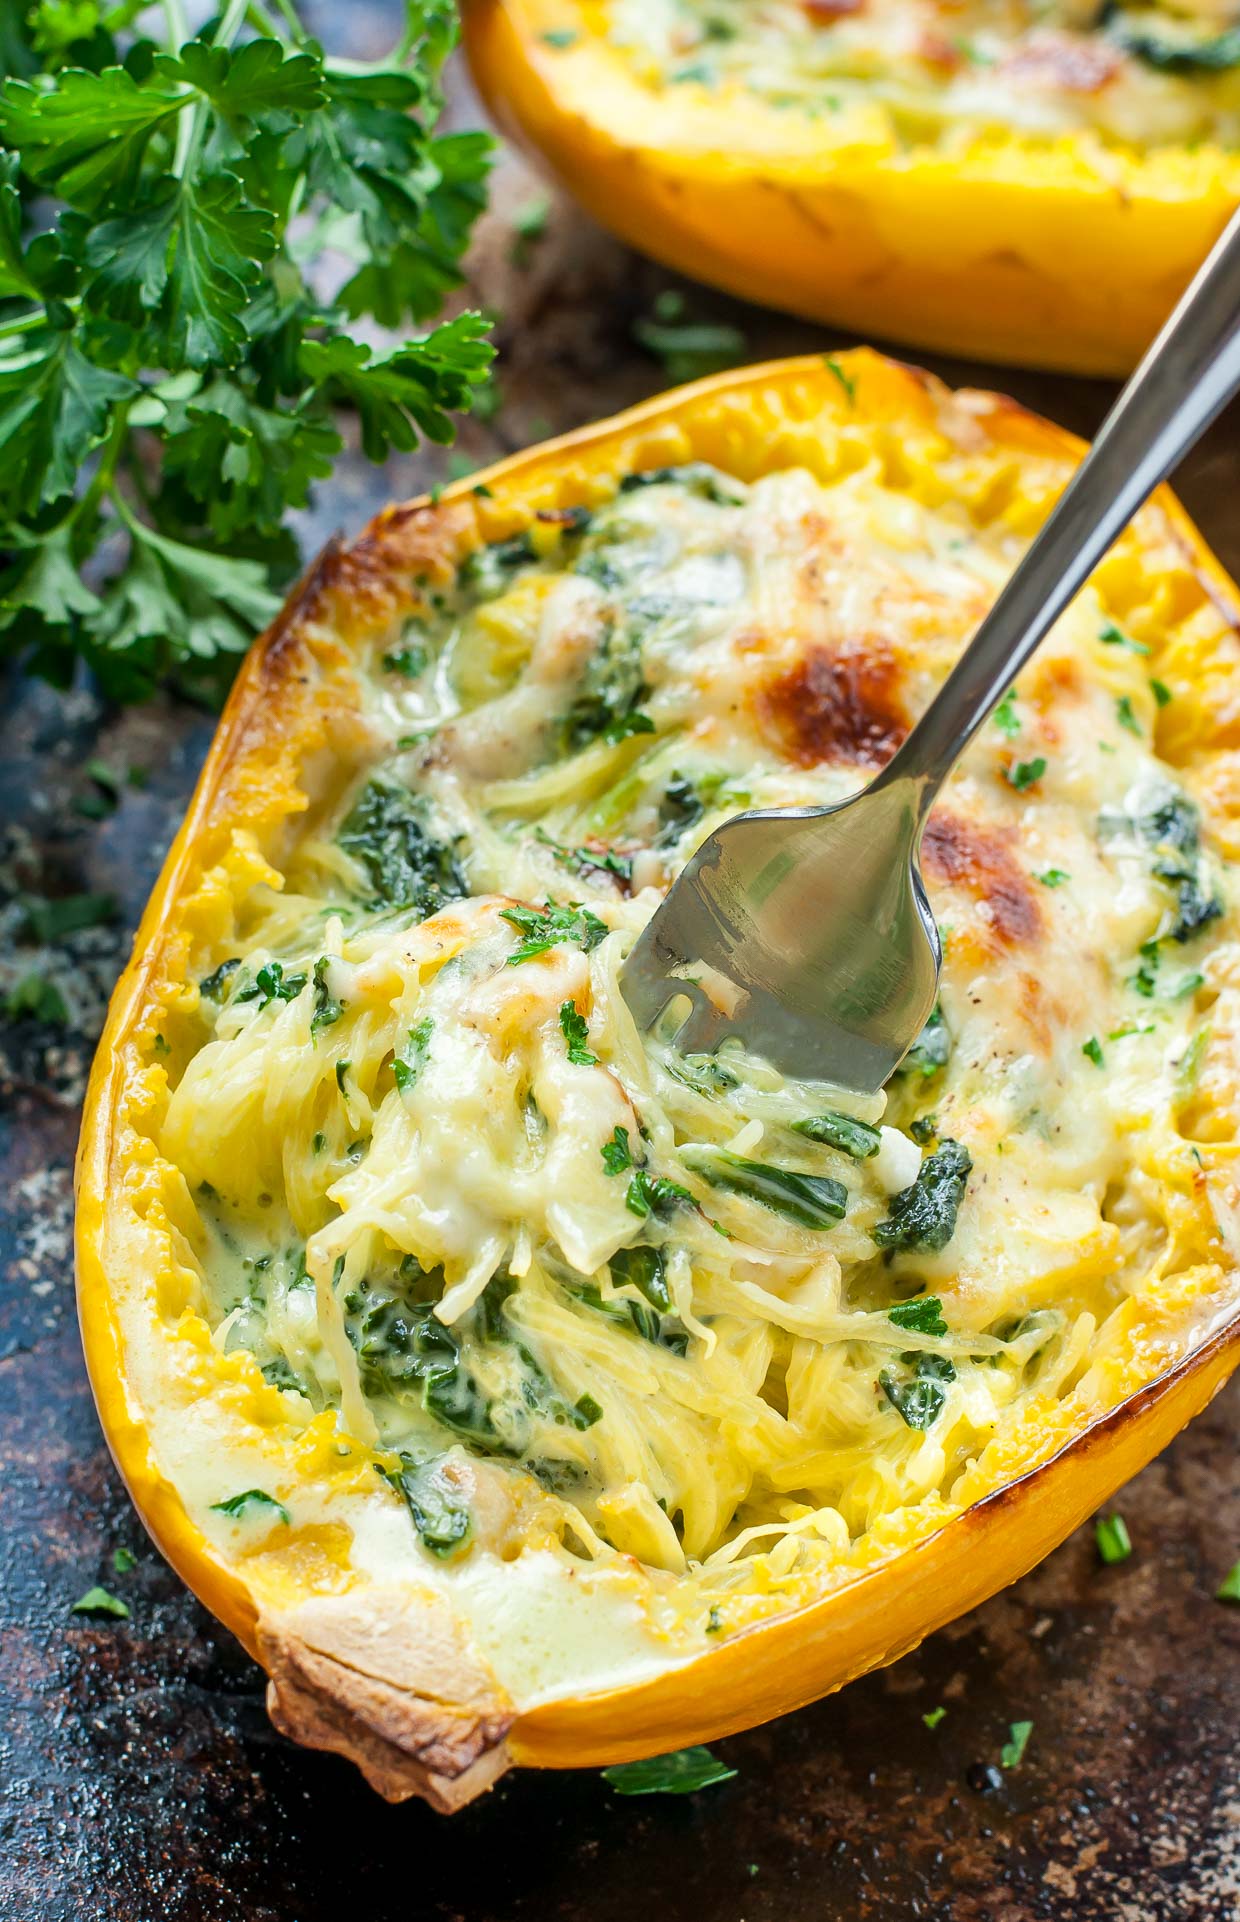 Cheesy Garlic and Parmesan Spinach Spaghetti Squash from Peas and Crayons